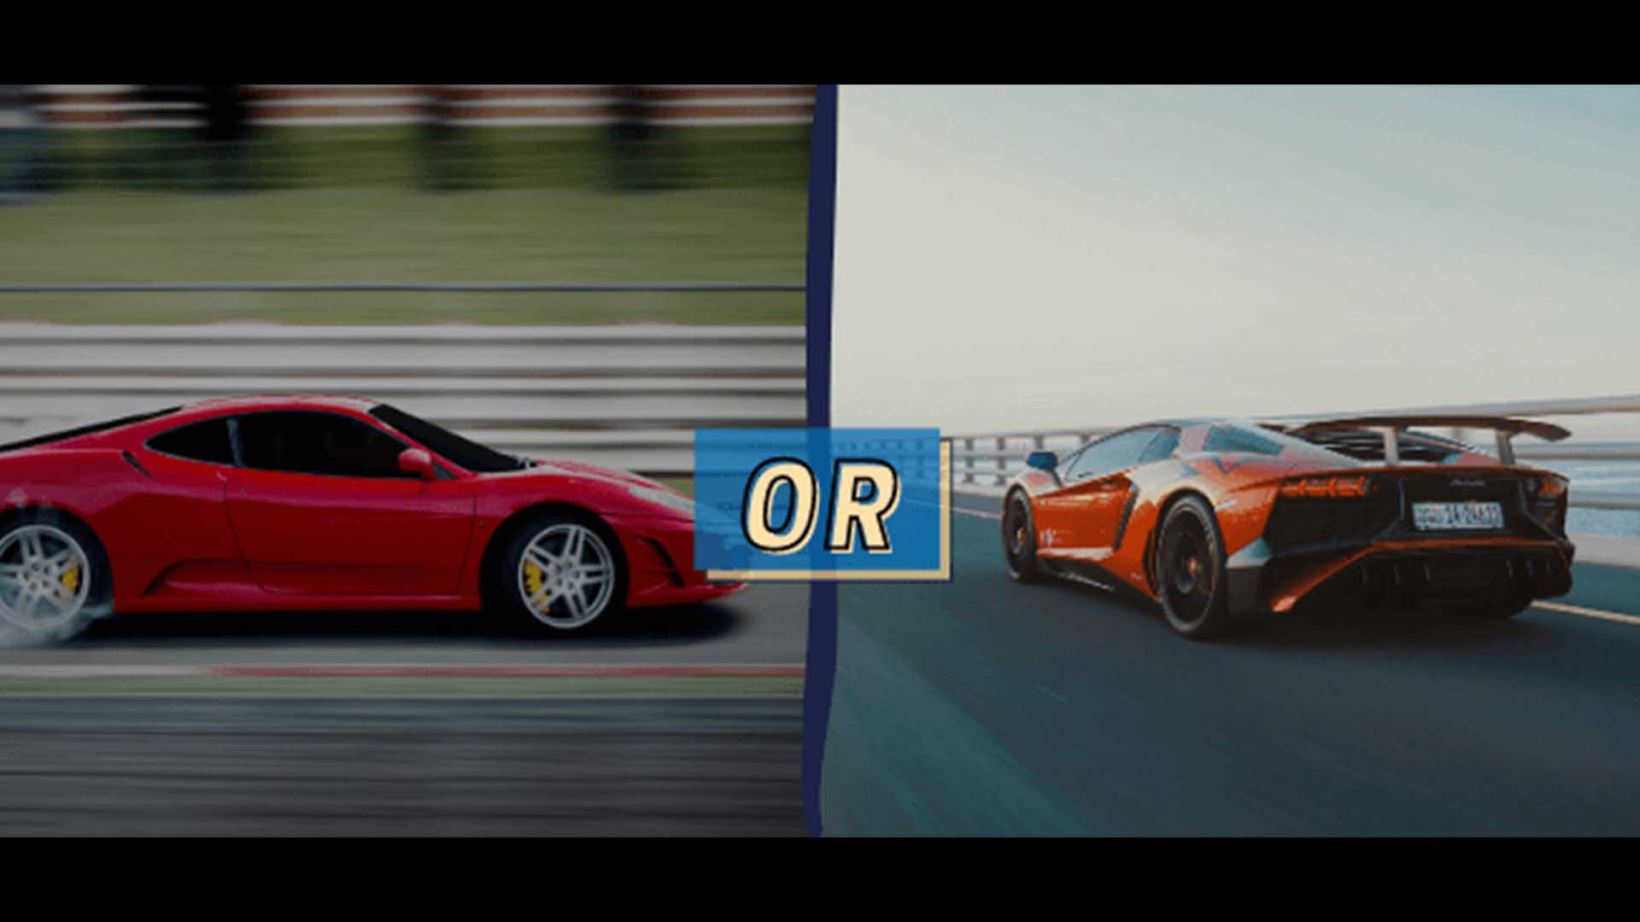 images/pages/instagram-polls-results-this-or-that-modified-and-performance-edition_1640.jpg